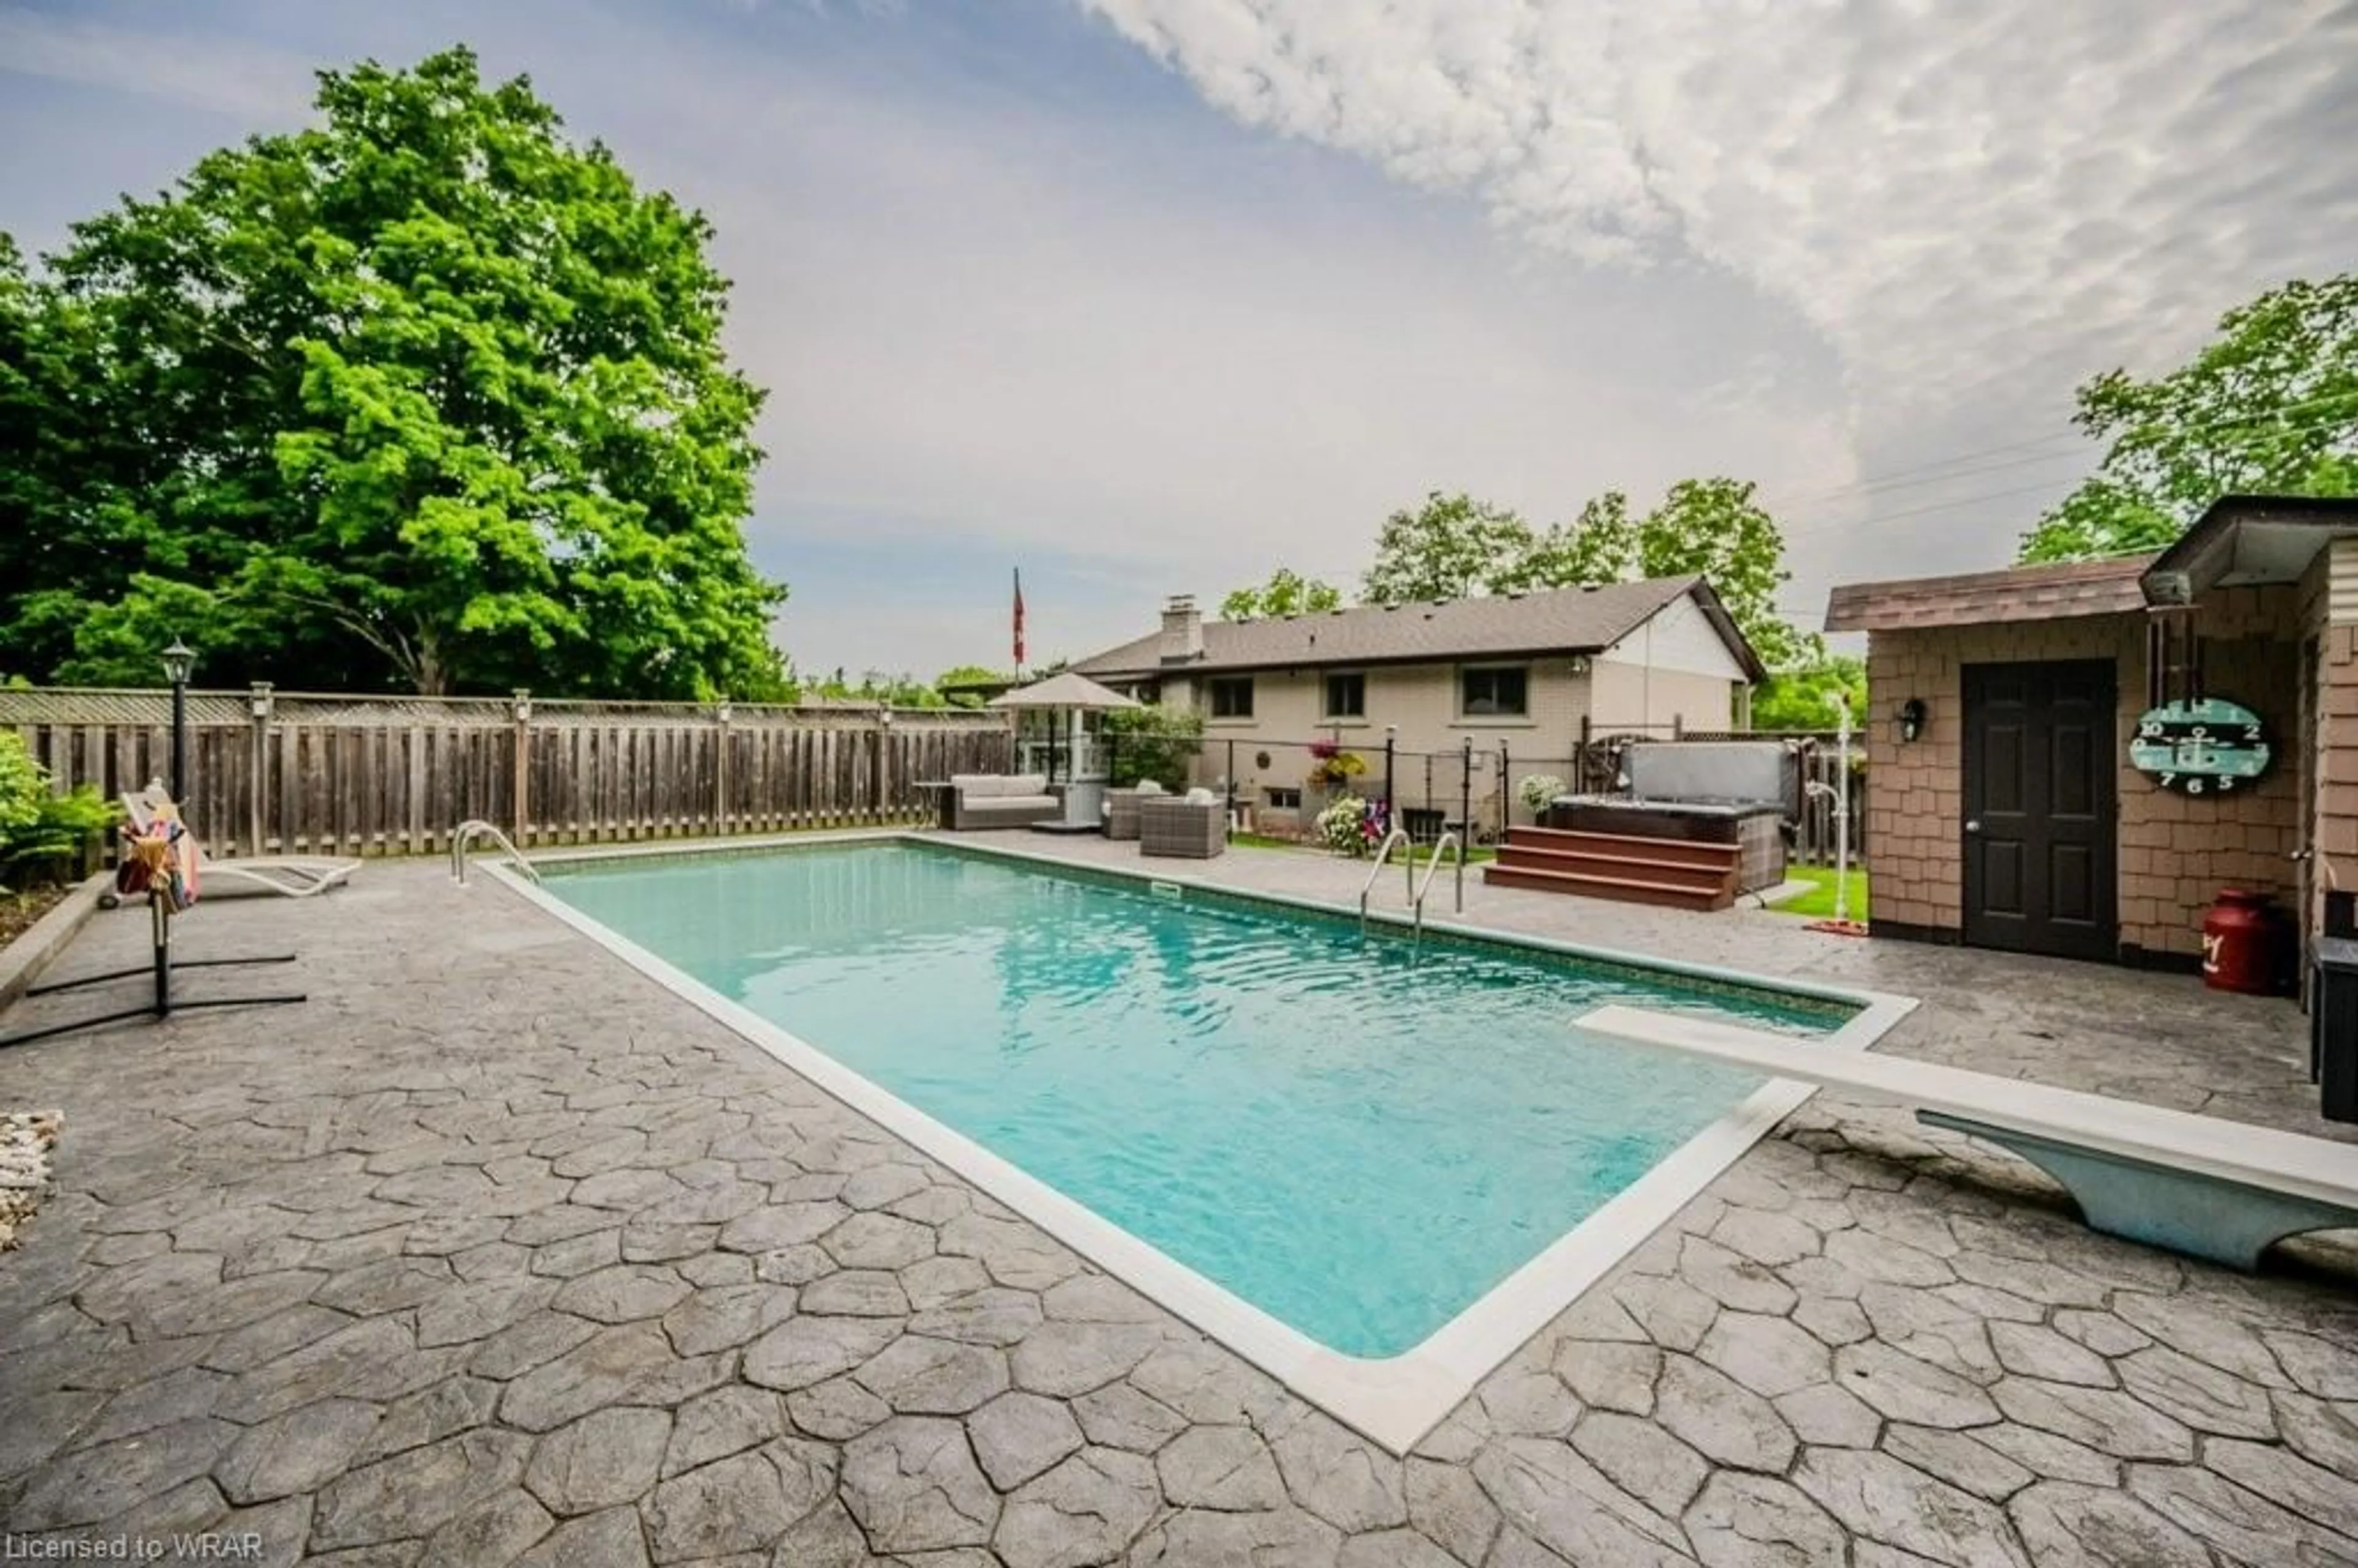 Indoor or outdoor pool for 1688 Branchton Rd, Branchton Ontario N0B 1L0